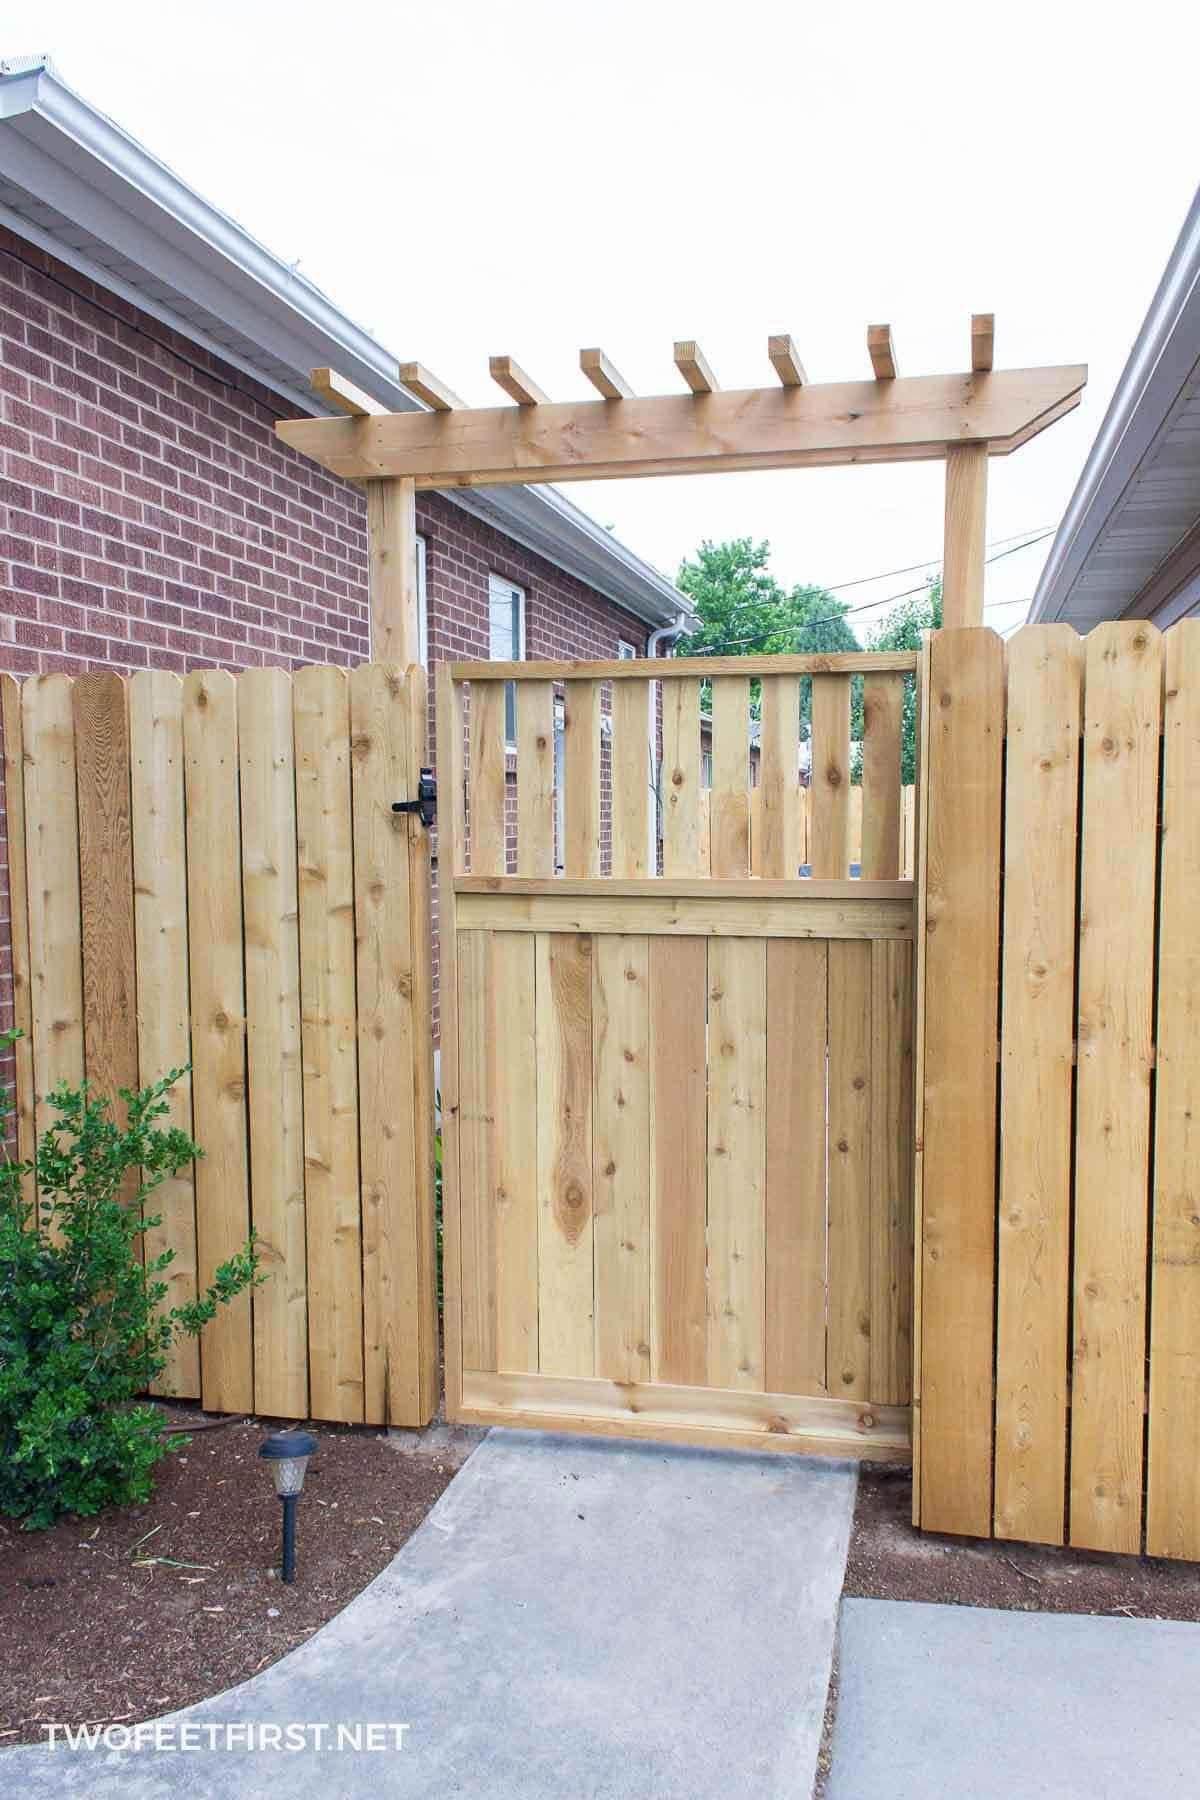 Rustic DIY Wooden Yard Fence and Gate